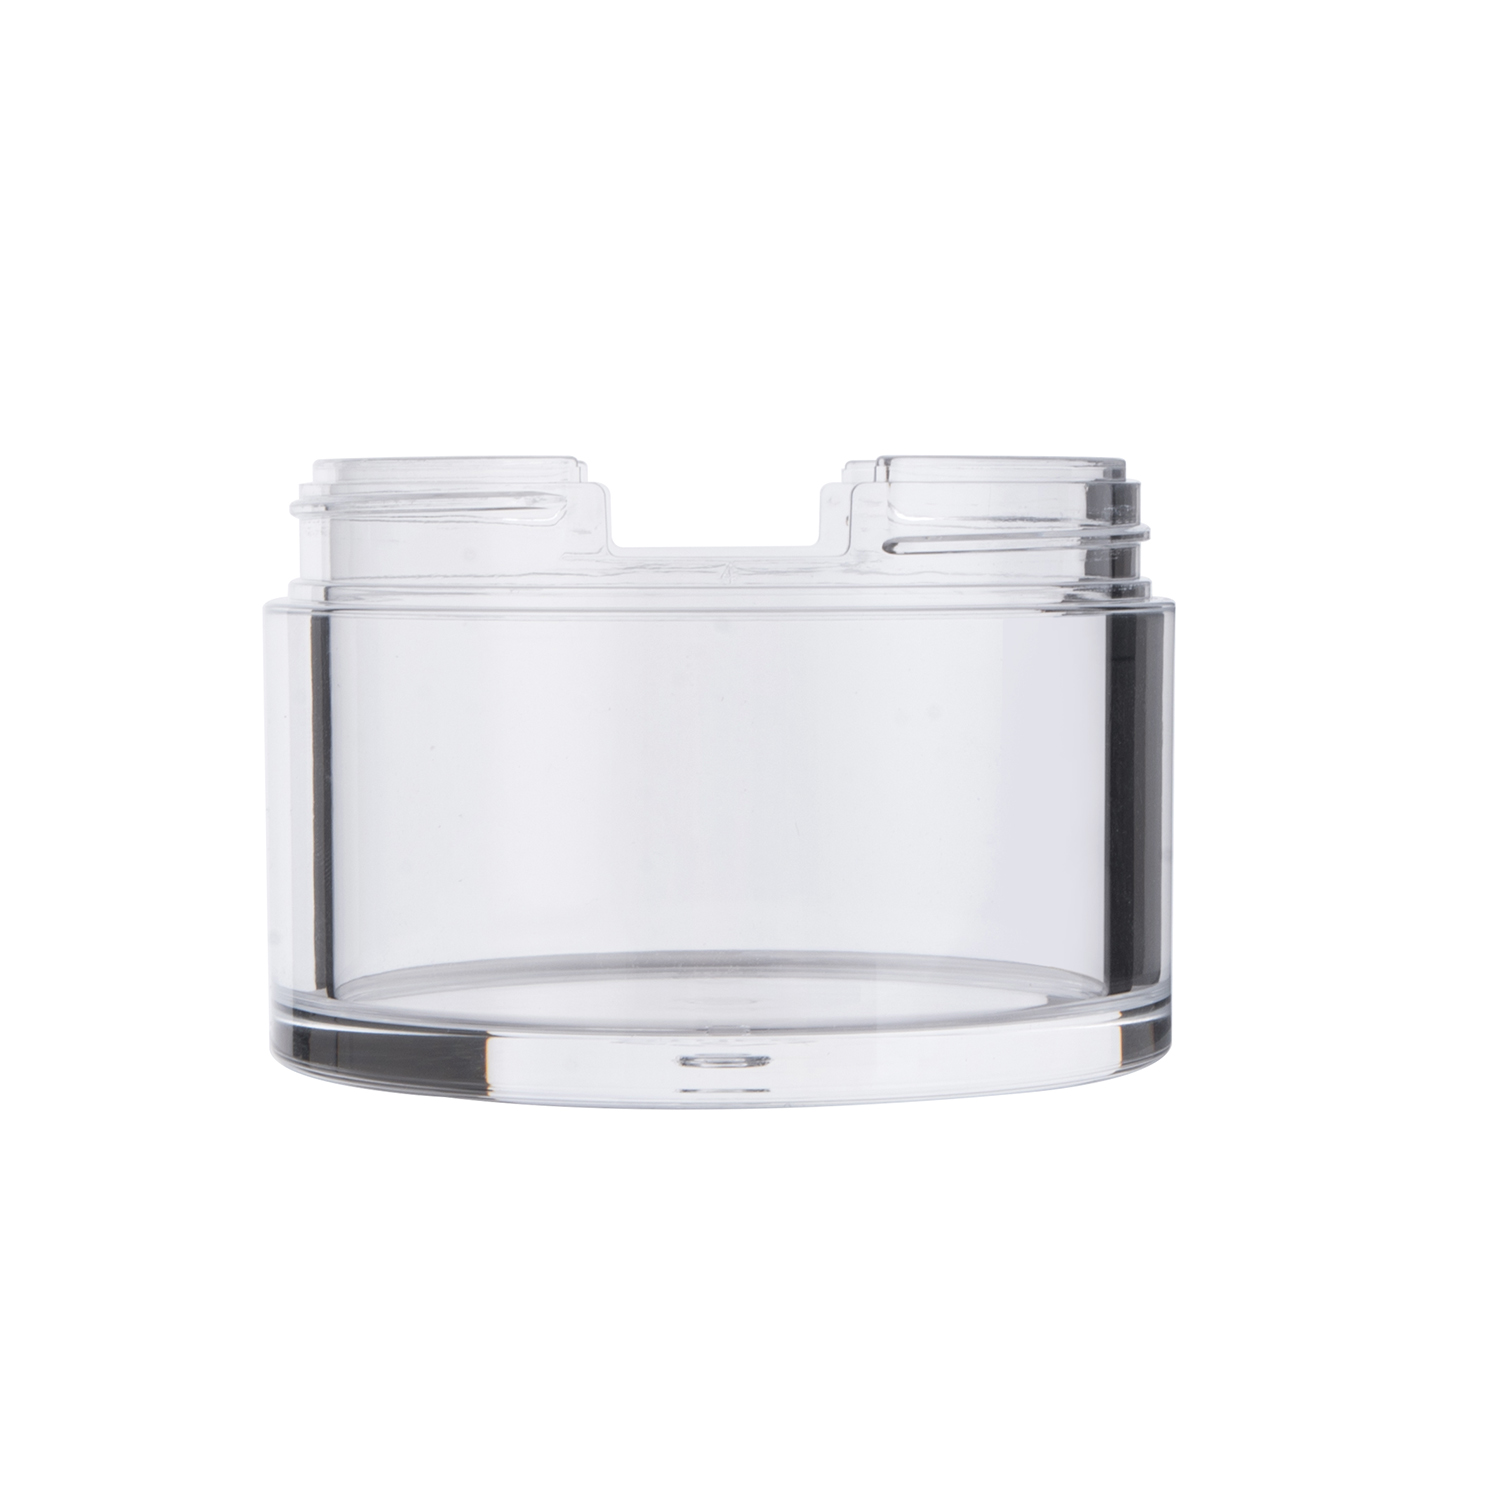 50g 100g 240g Sustainable Cosmetic Packaging Refillable Cosmetic Jar Wholesale Eco-Friendly Cream Jar